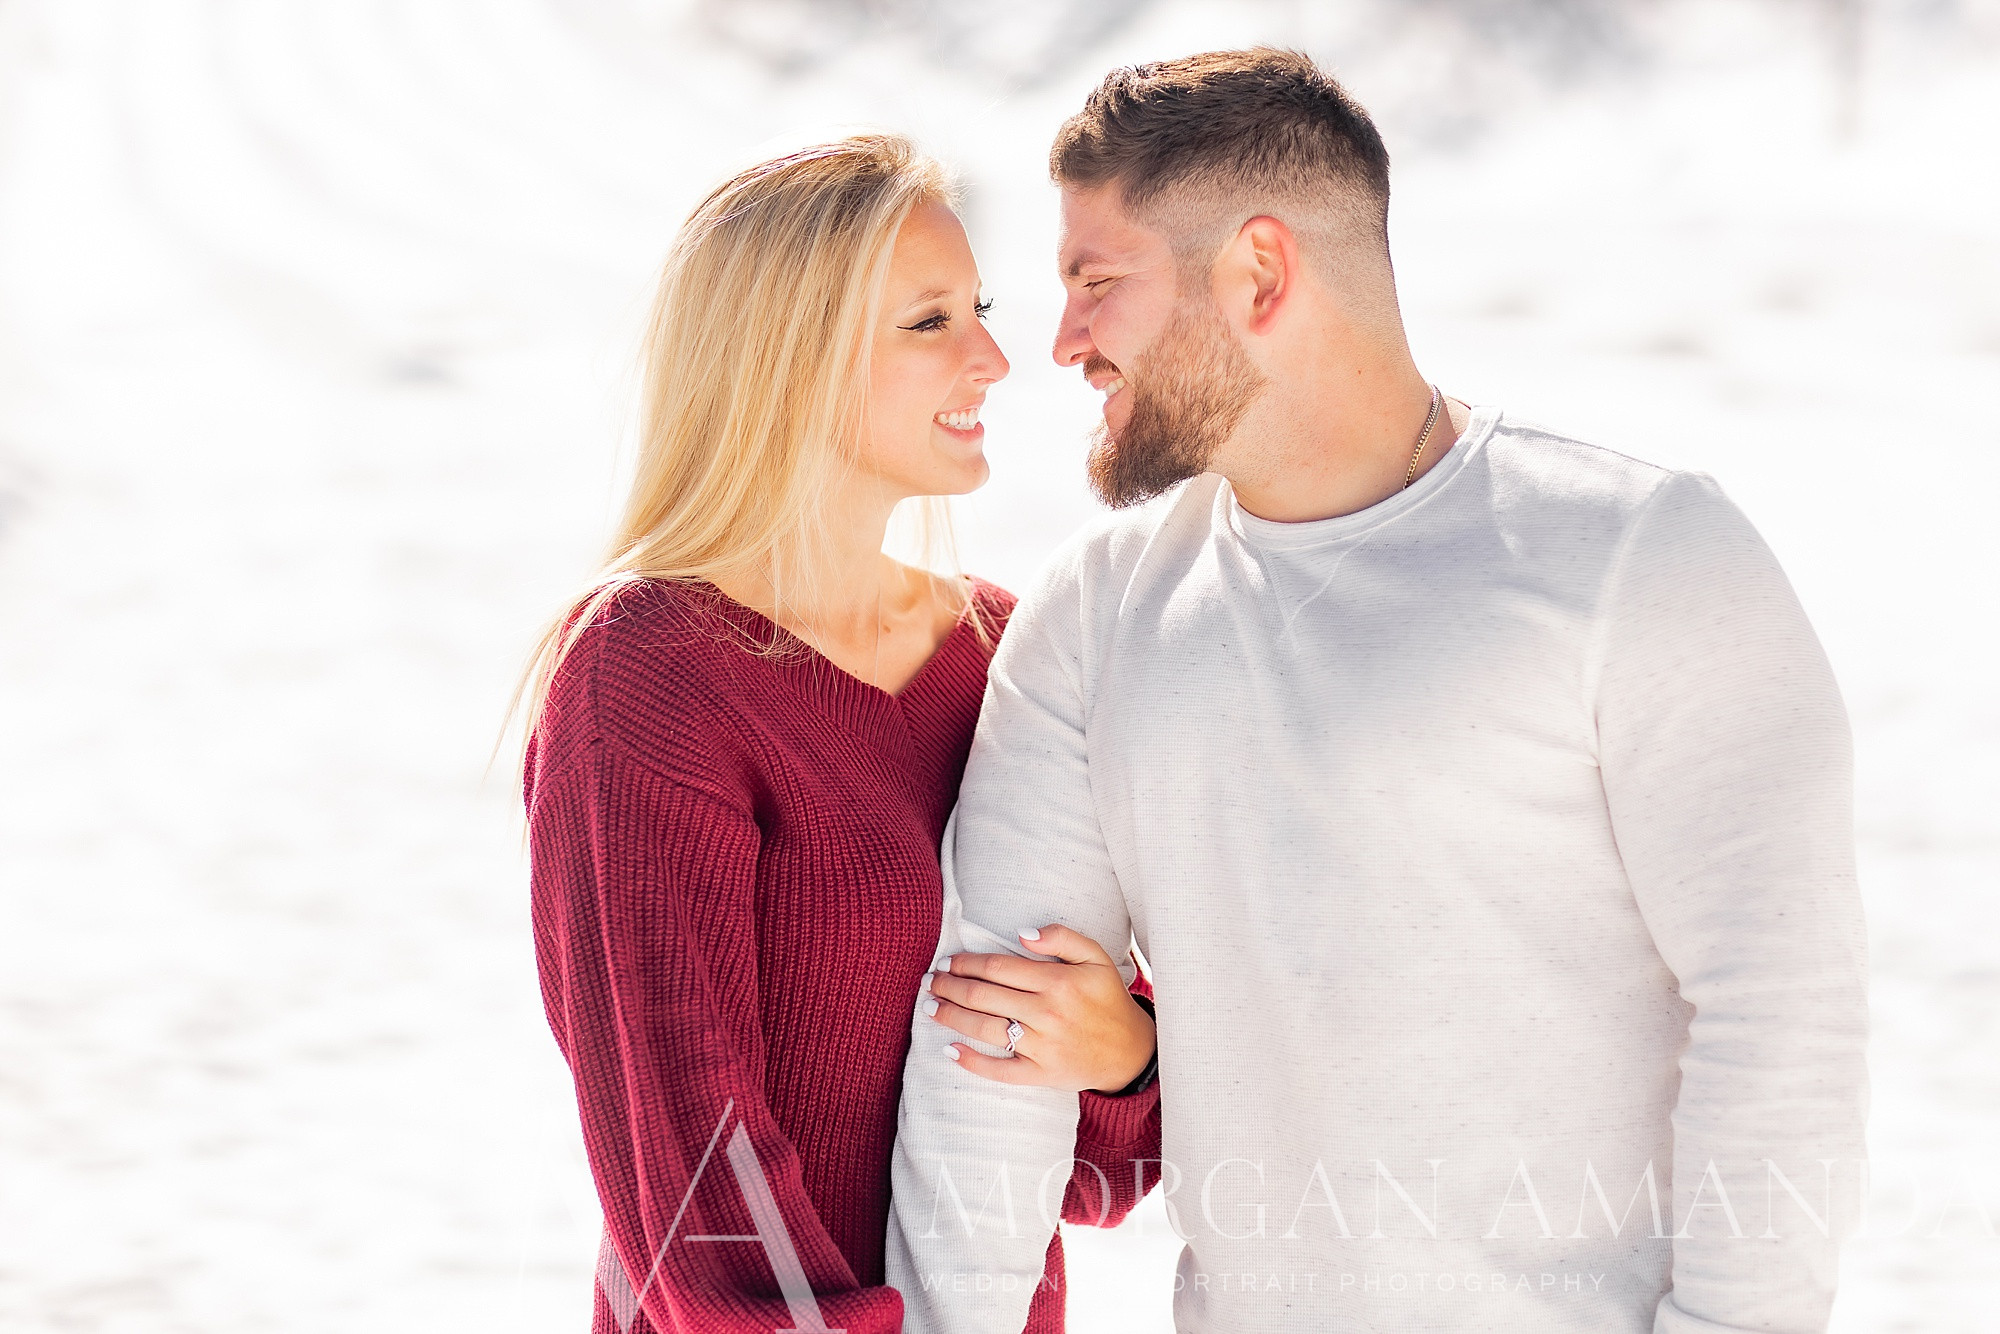 bride and groom smile together during wintery engagement photos at Beech Mountain